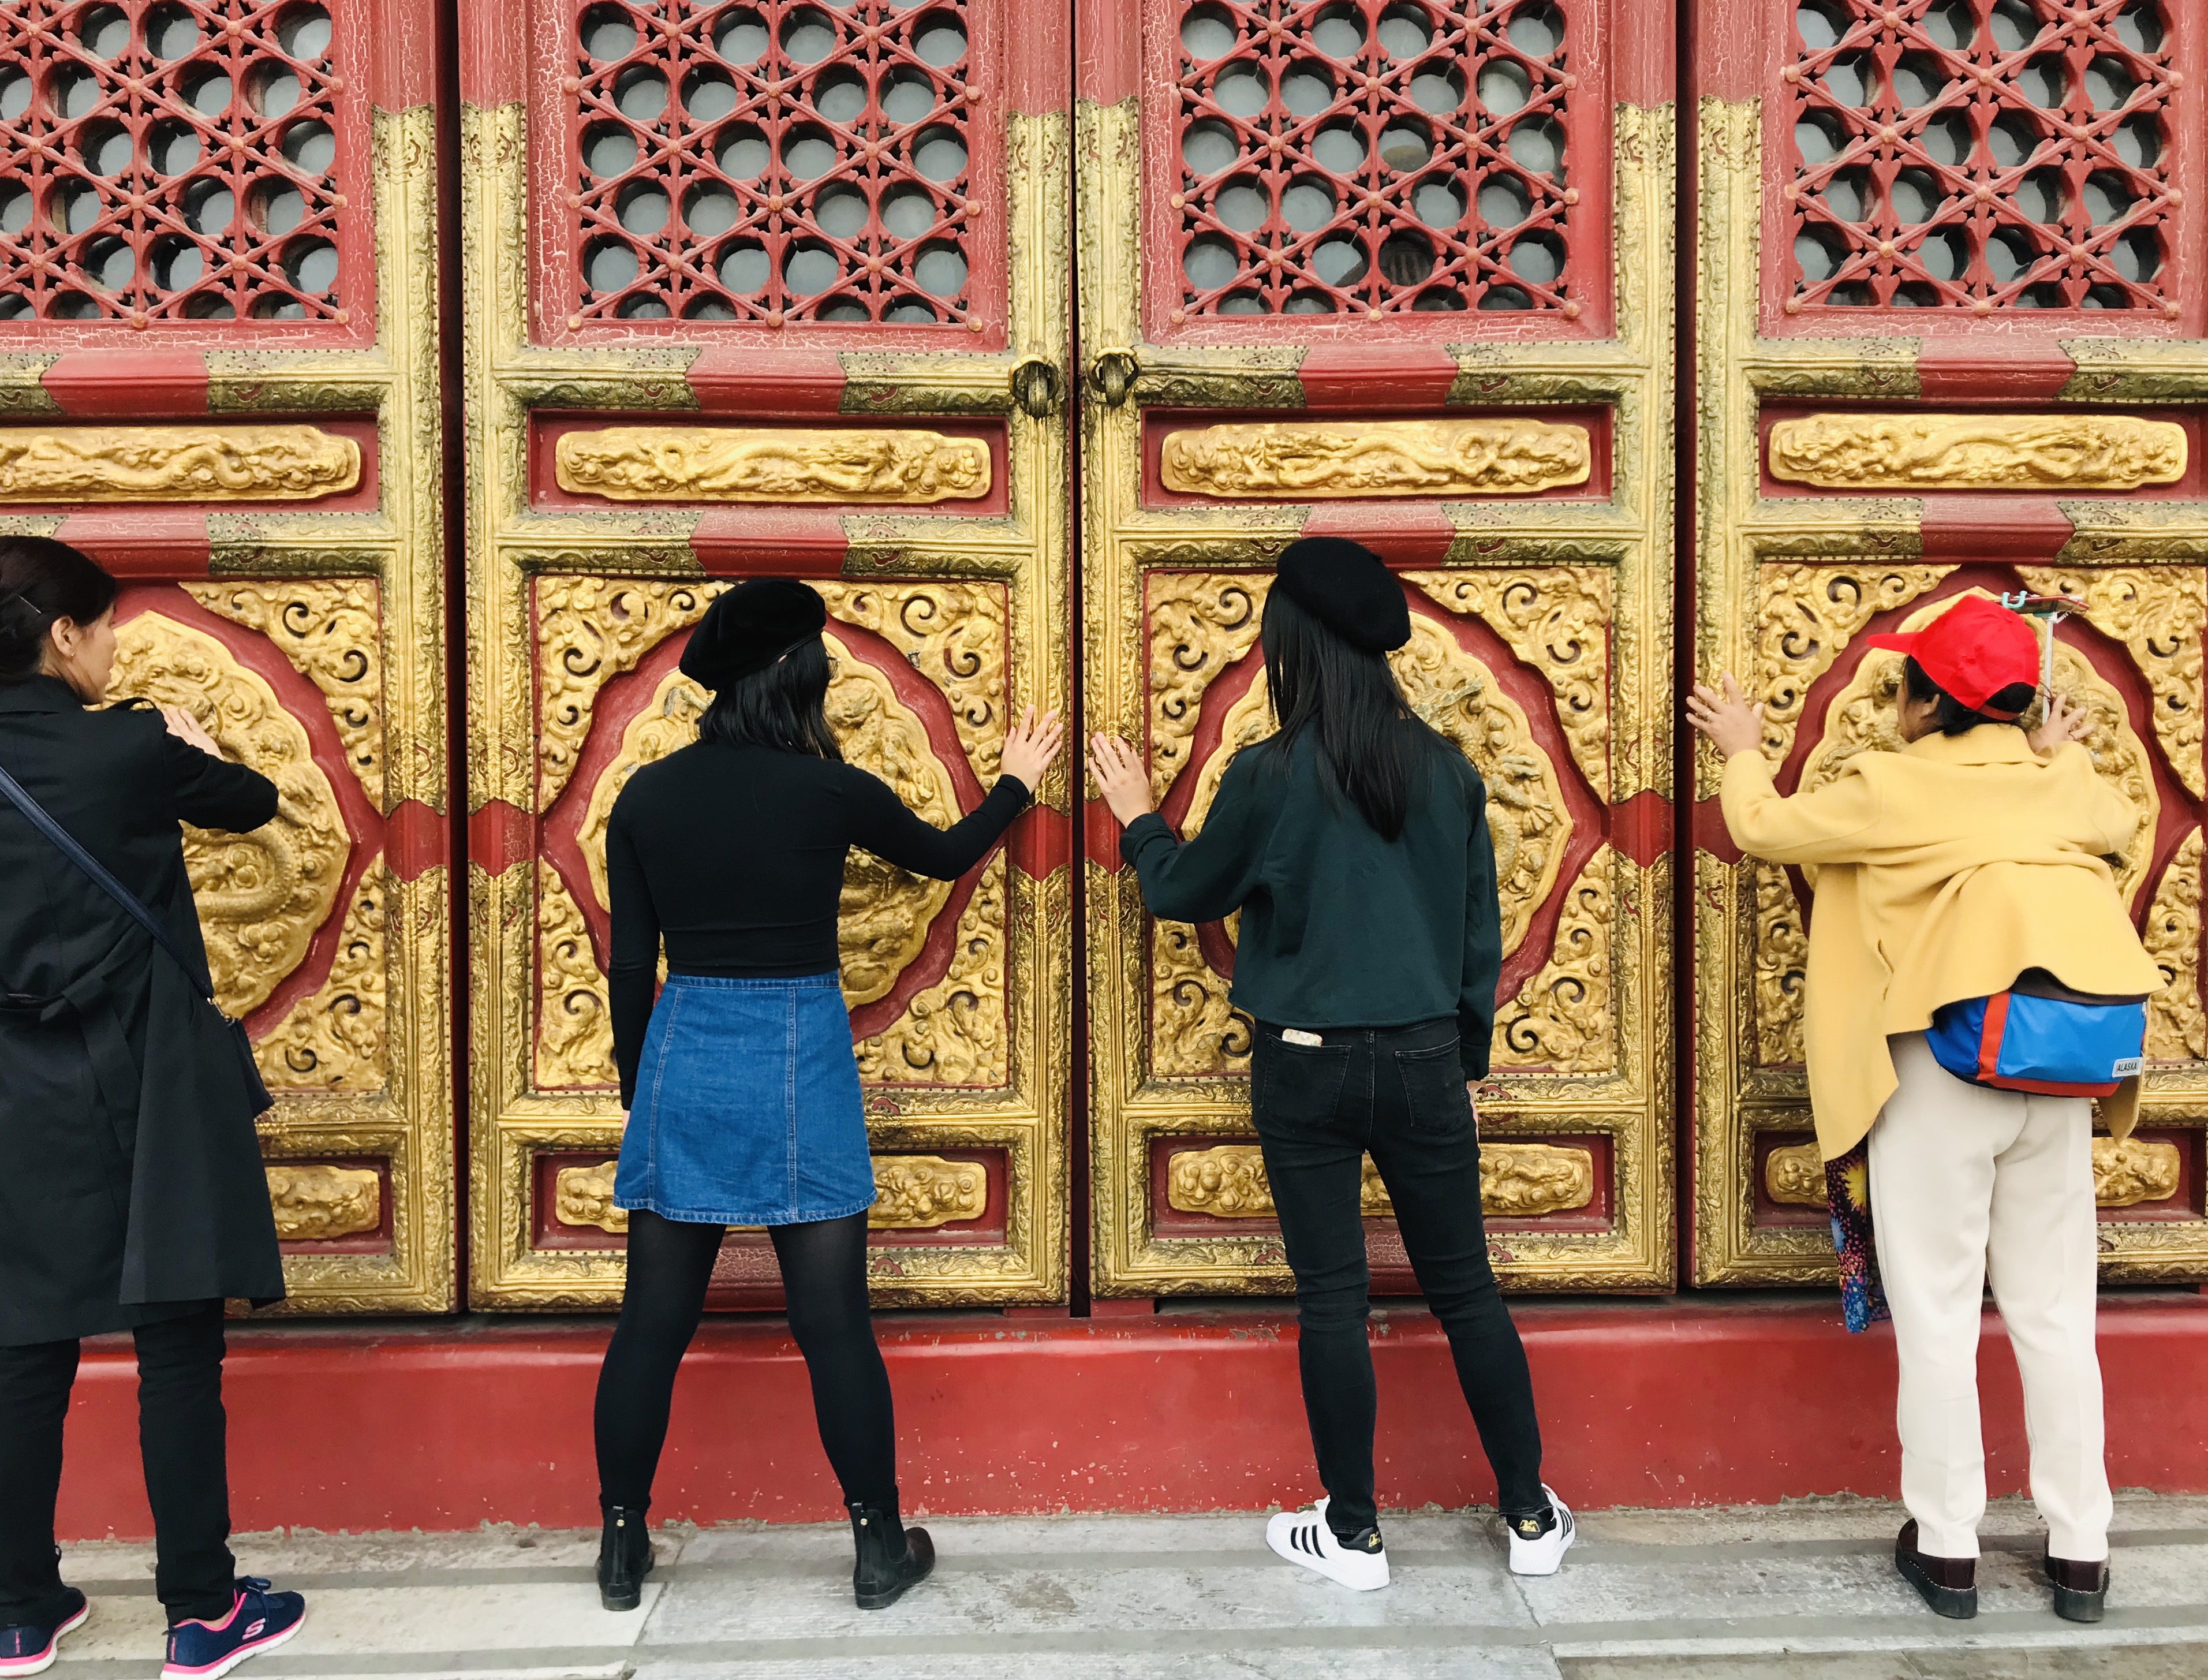 Sarah and I touching the Doors in the Forbidden City for blessings.